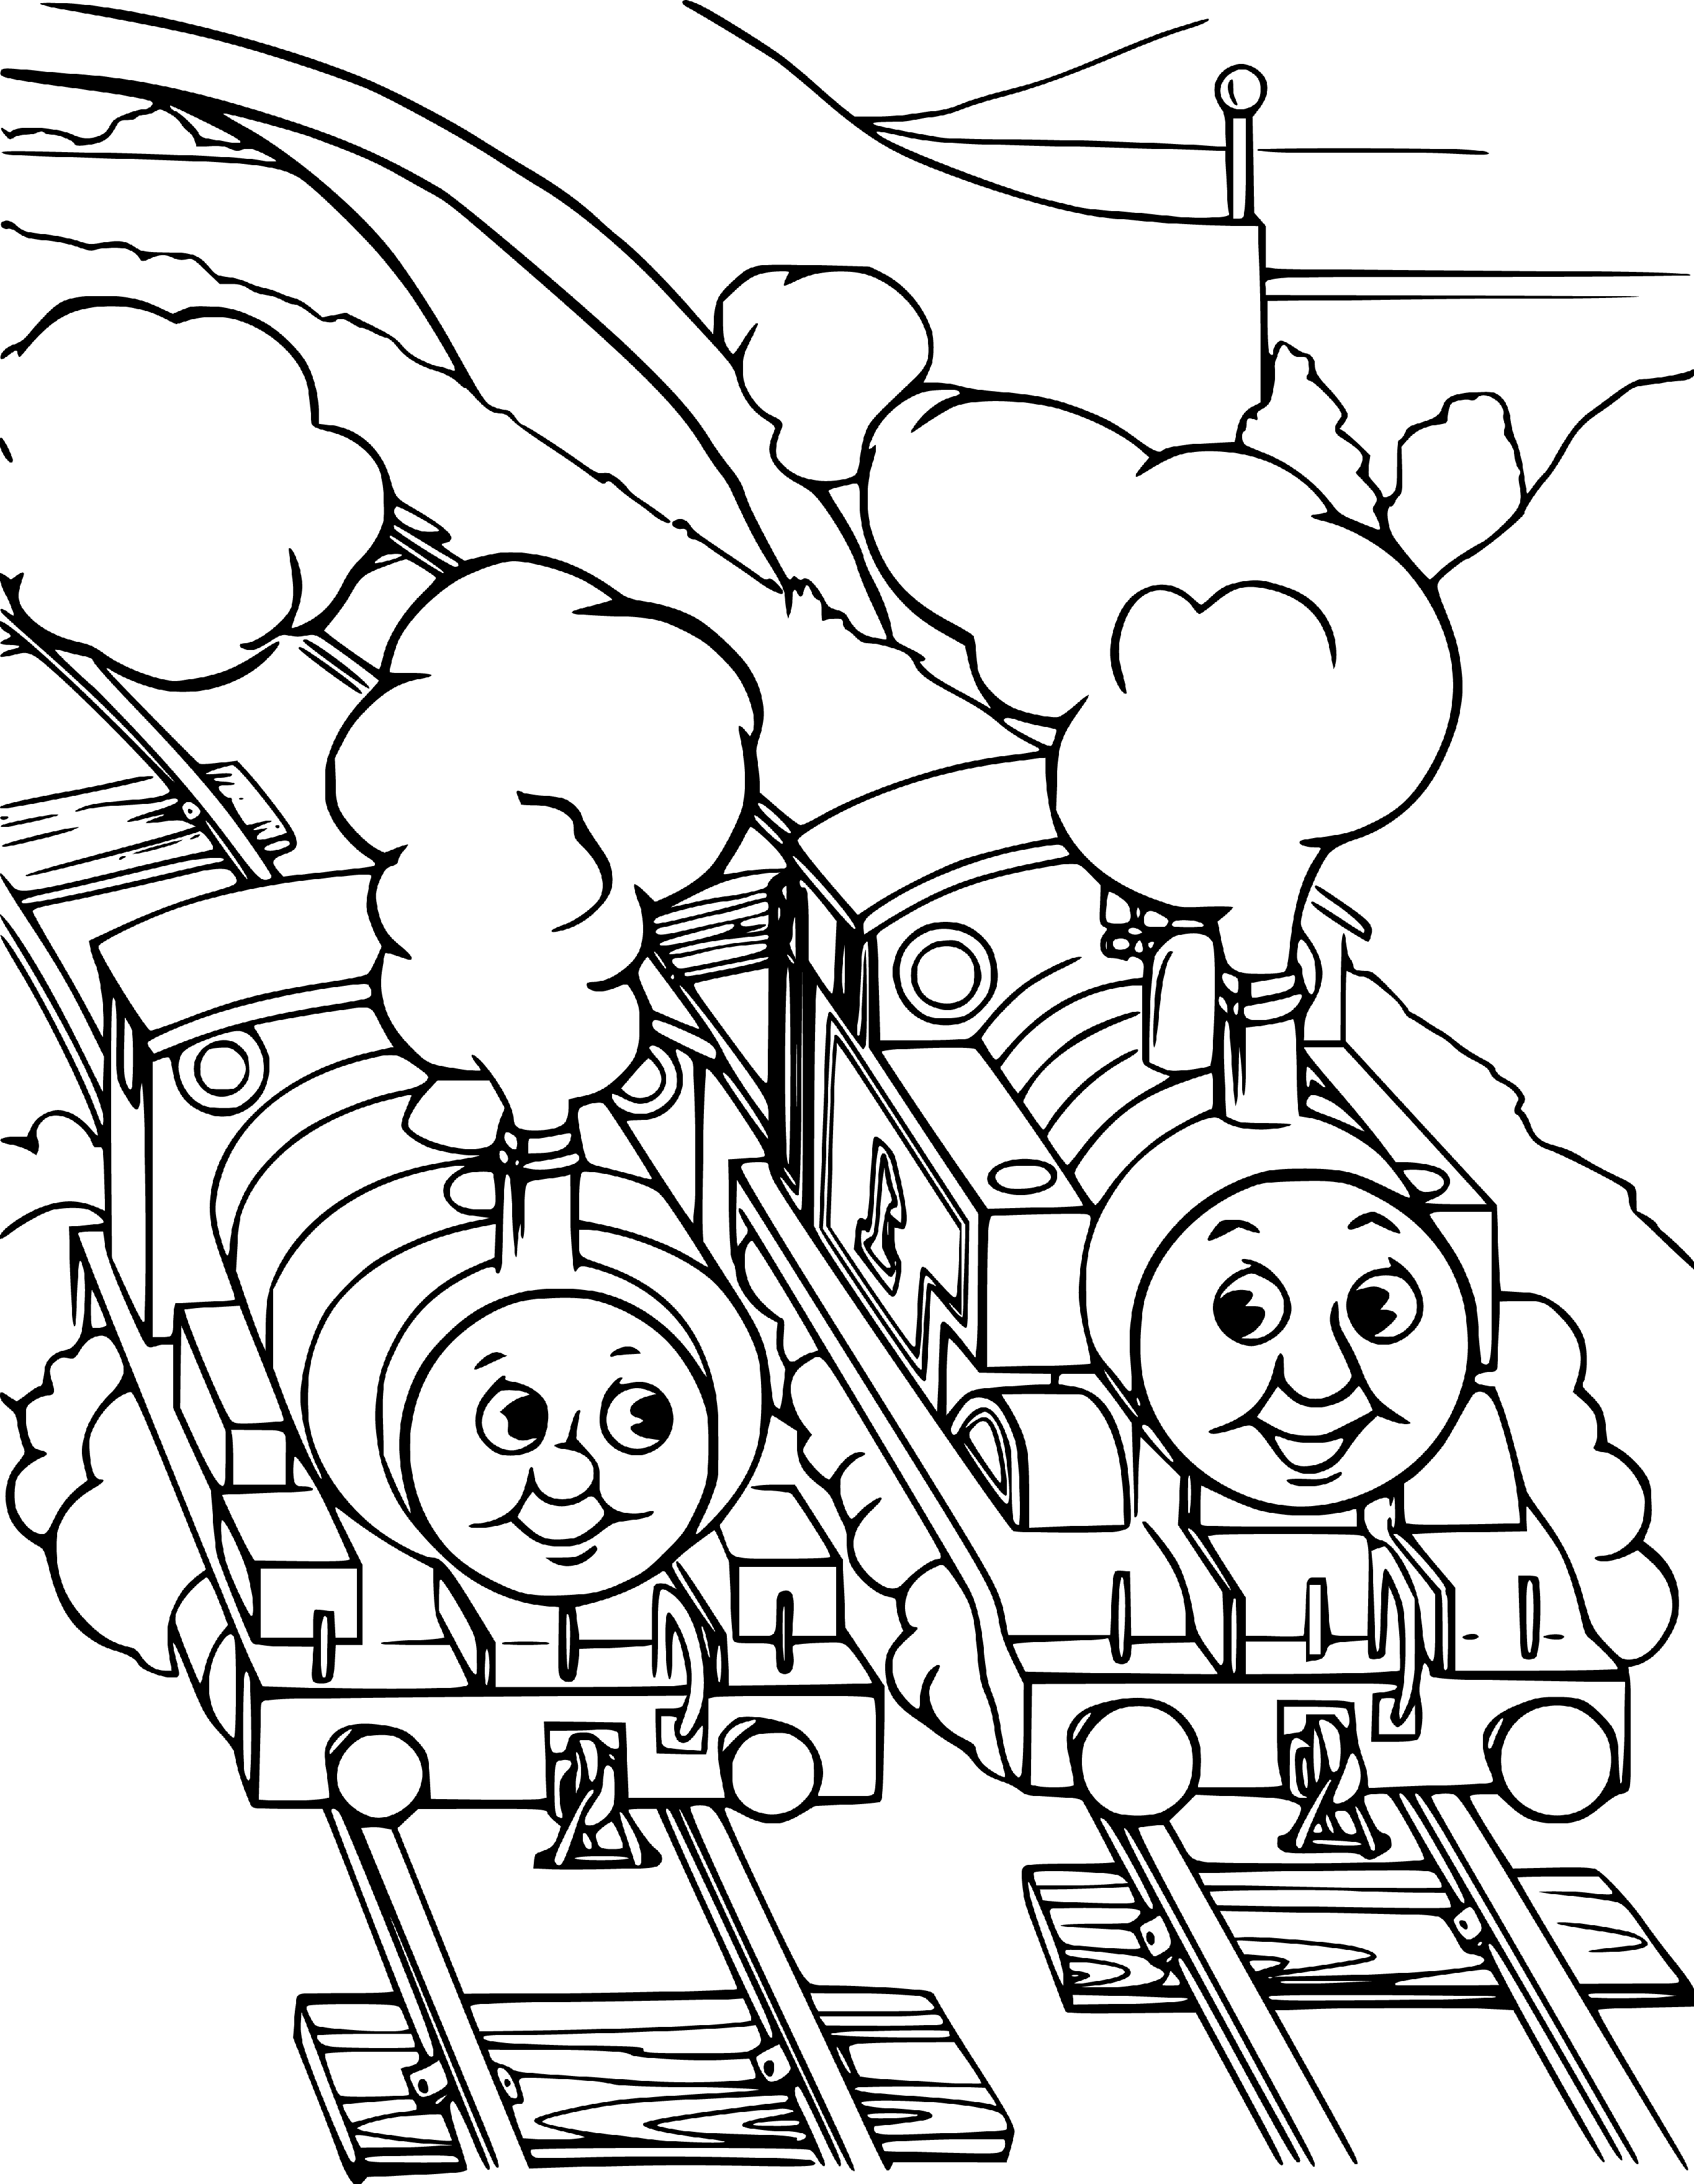 Thomas and Percy the Trains Coloring Sheets for Kids Printable Free - SheetalColor.com